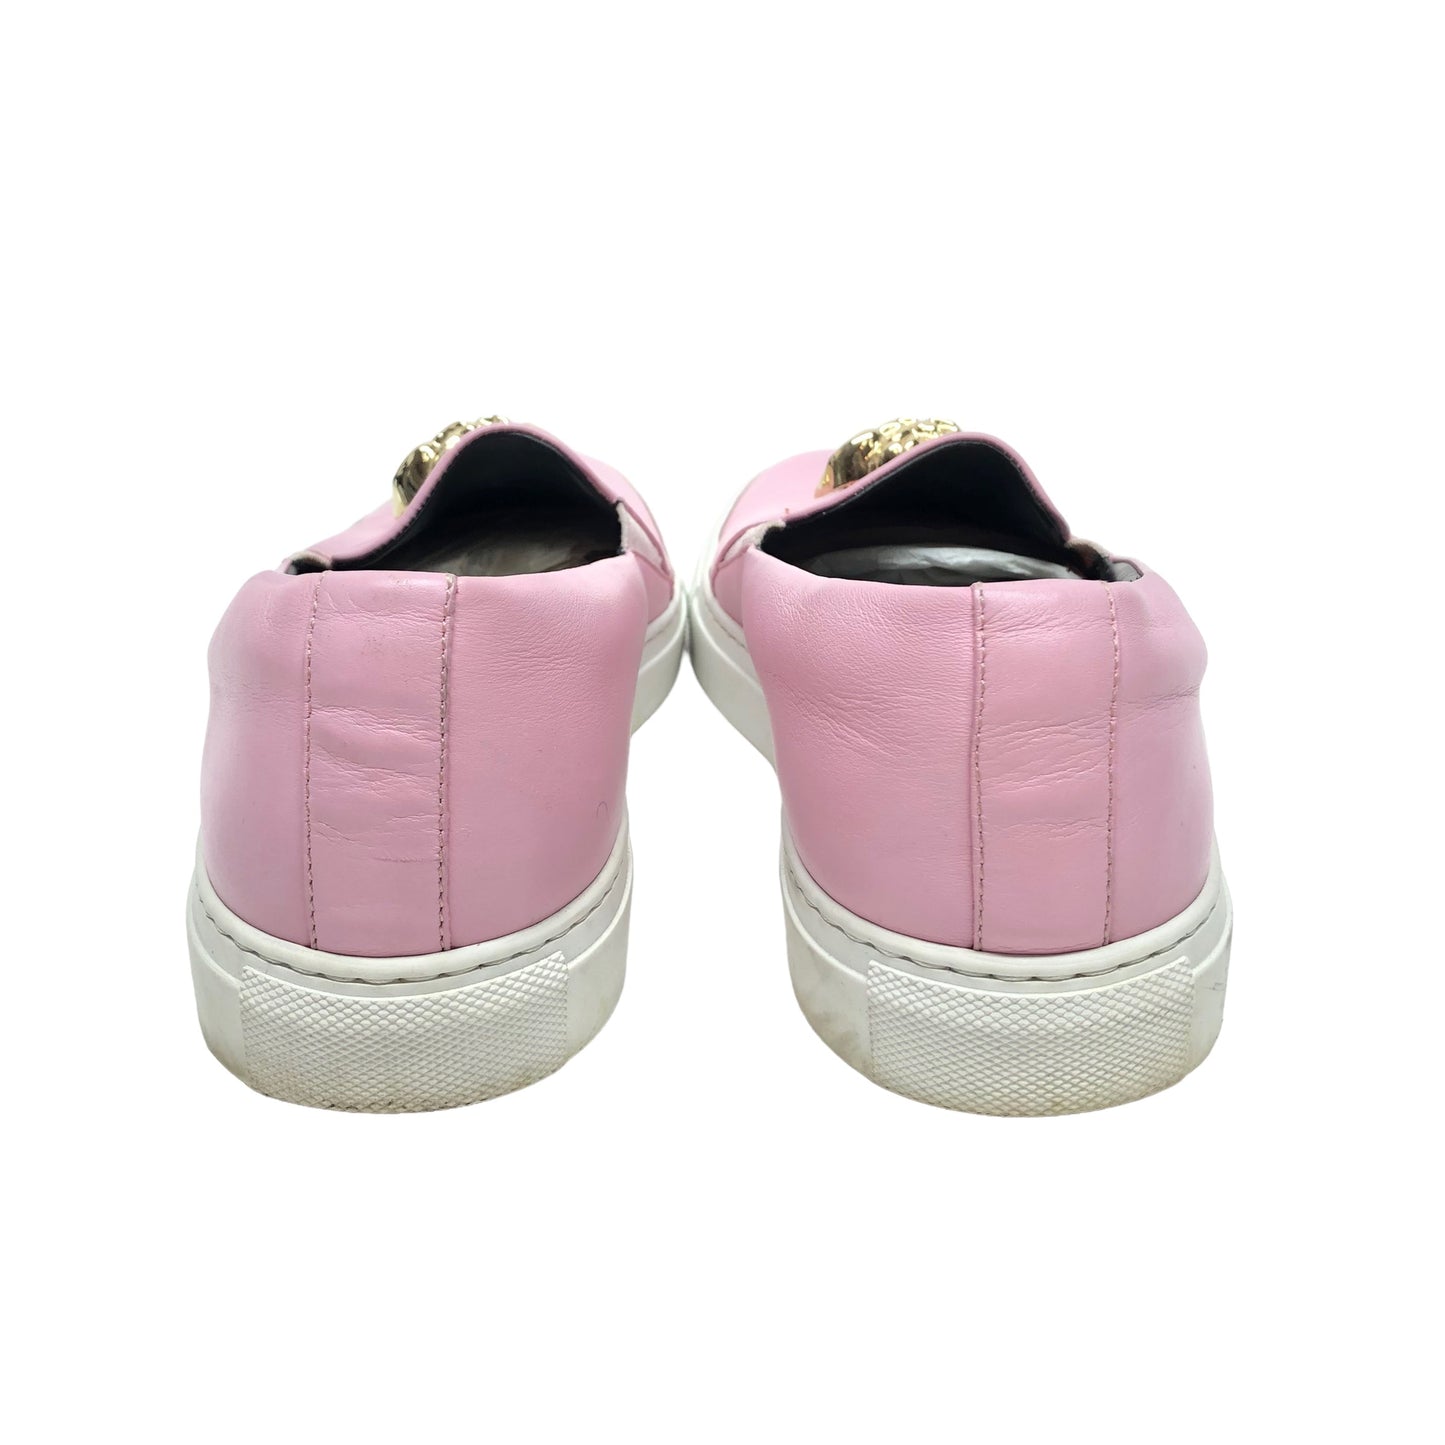 Pink & White Shoes Luxury Designer Versace, Size 10